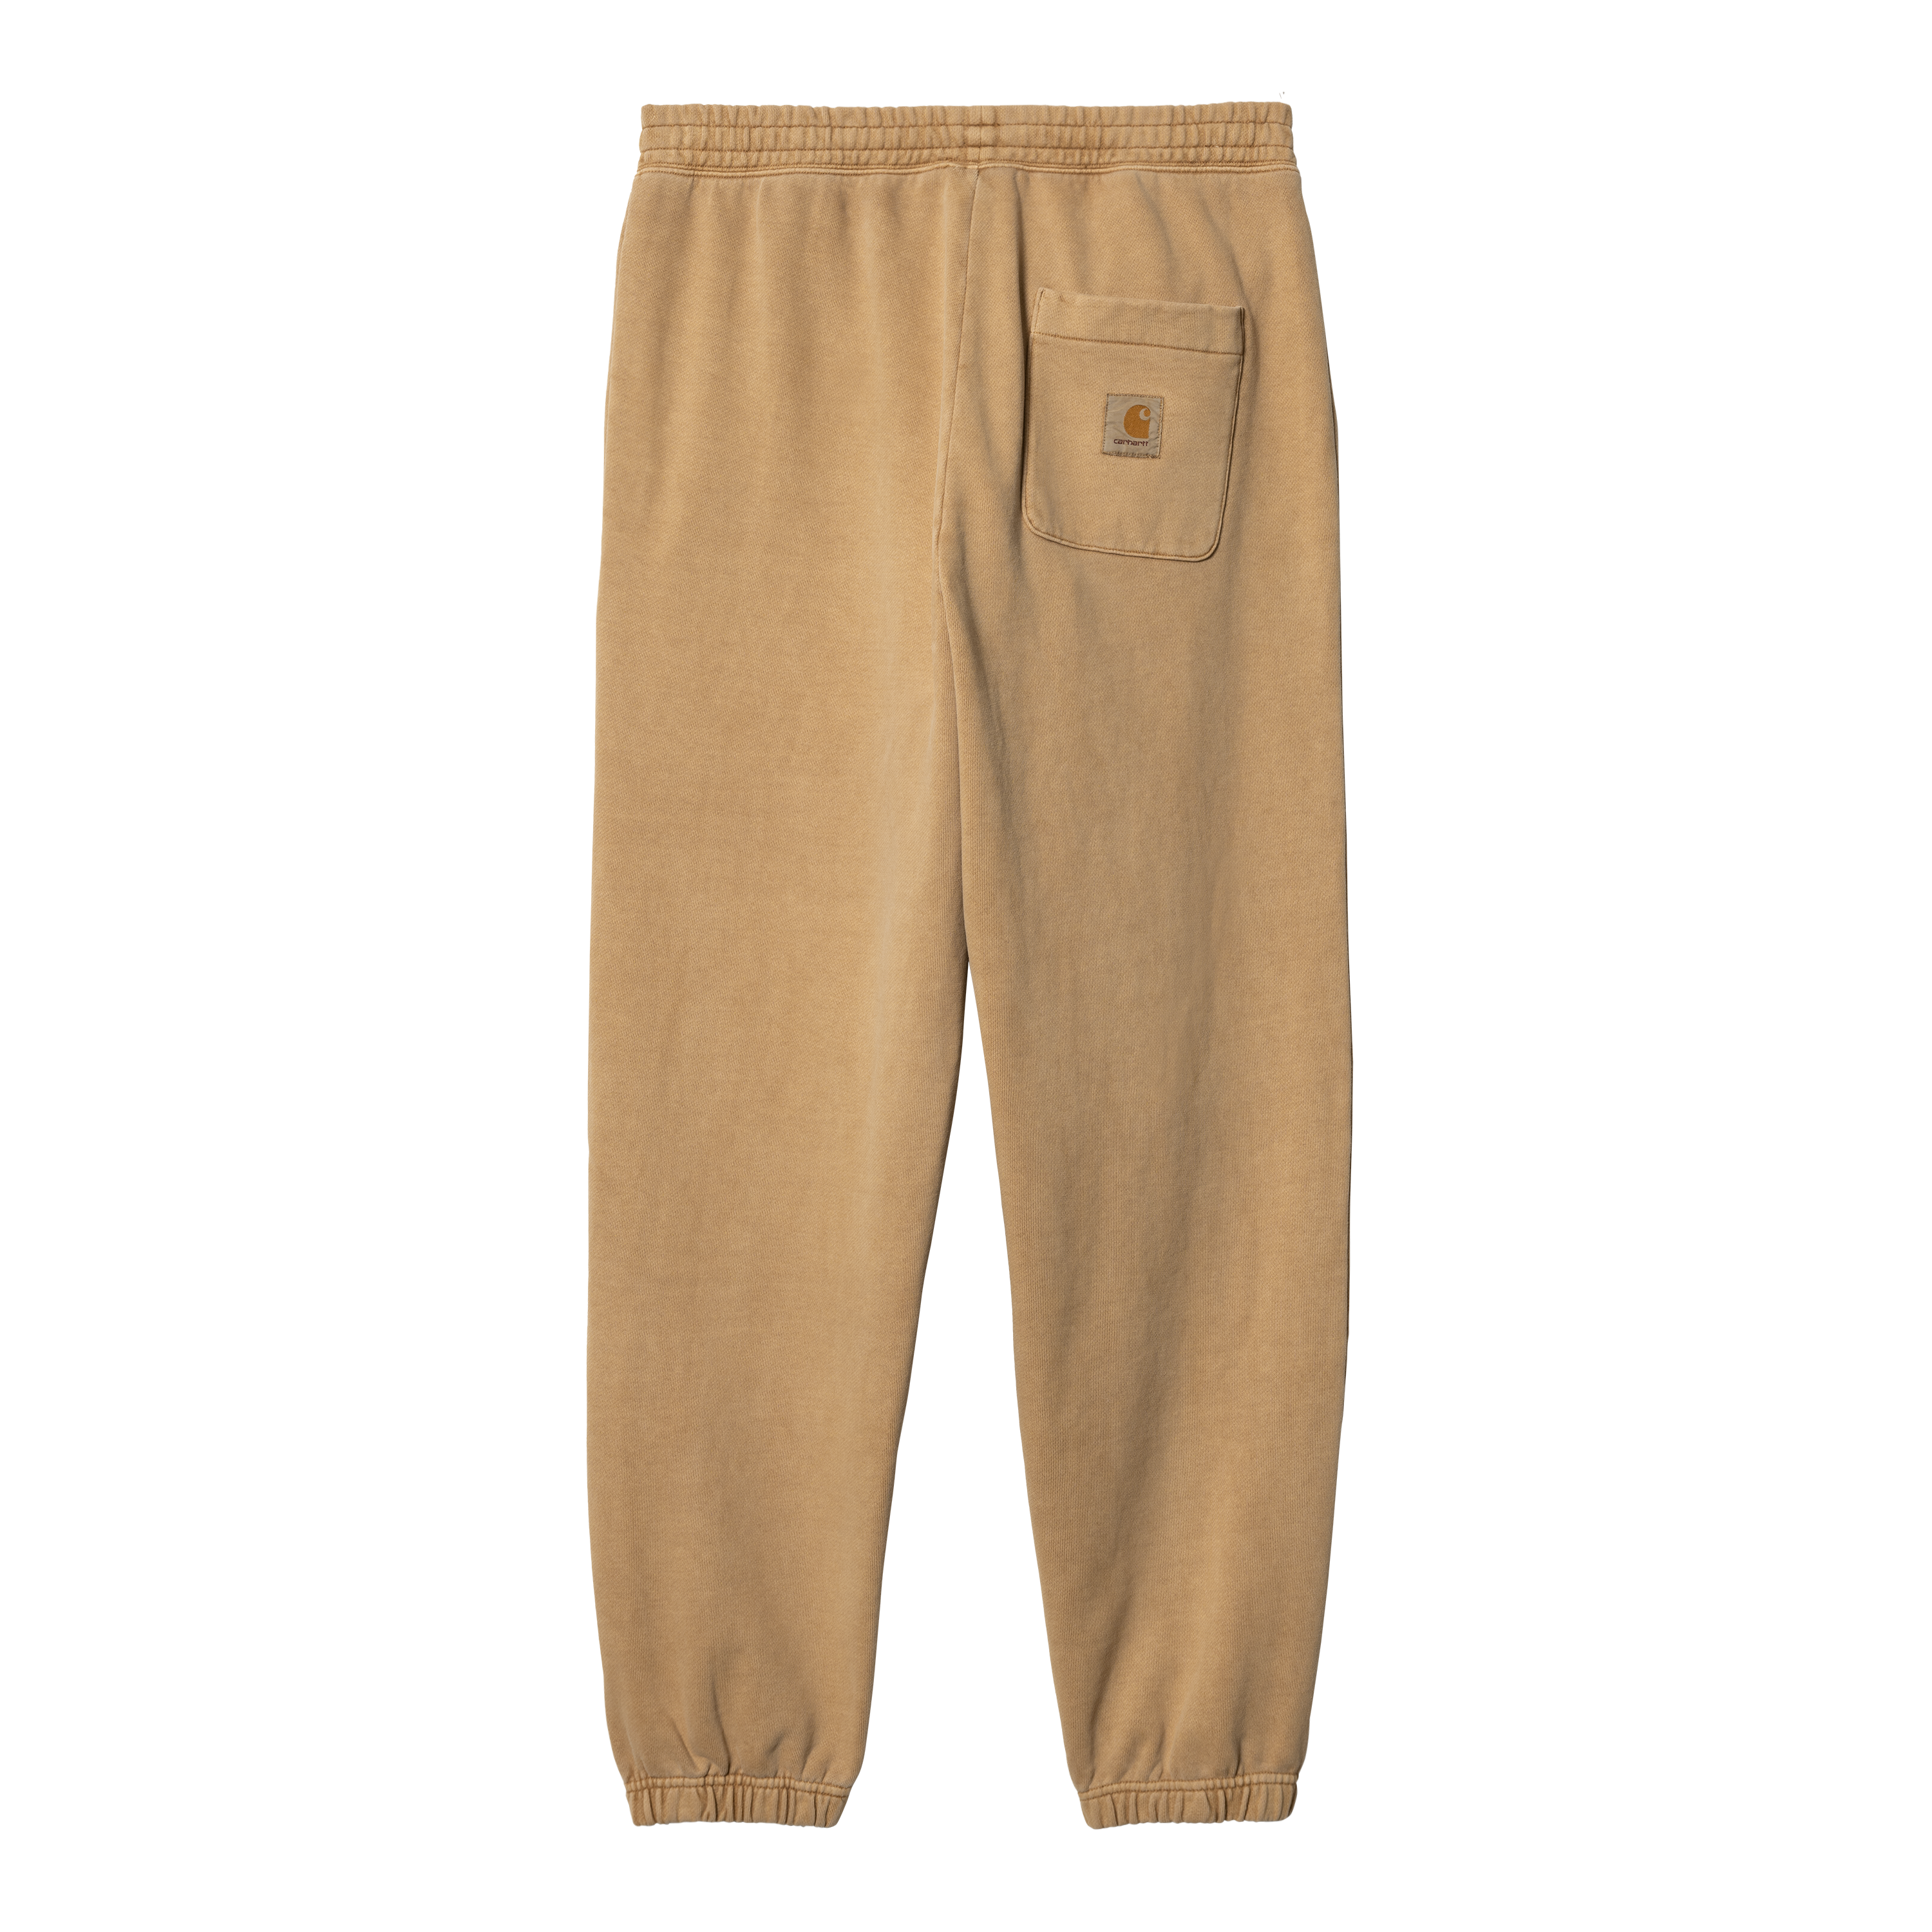 Carhartt WIP Nelson Sweat Pant in Brown